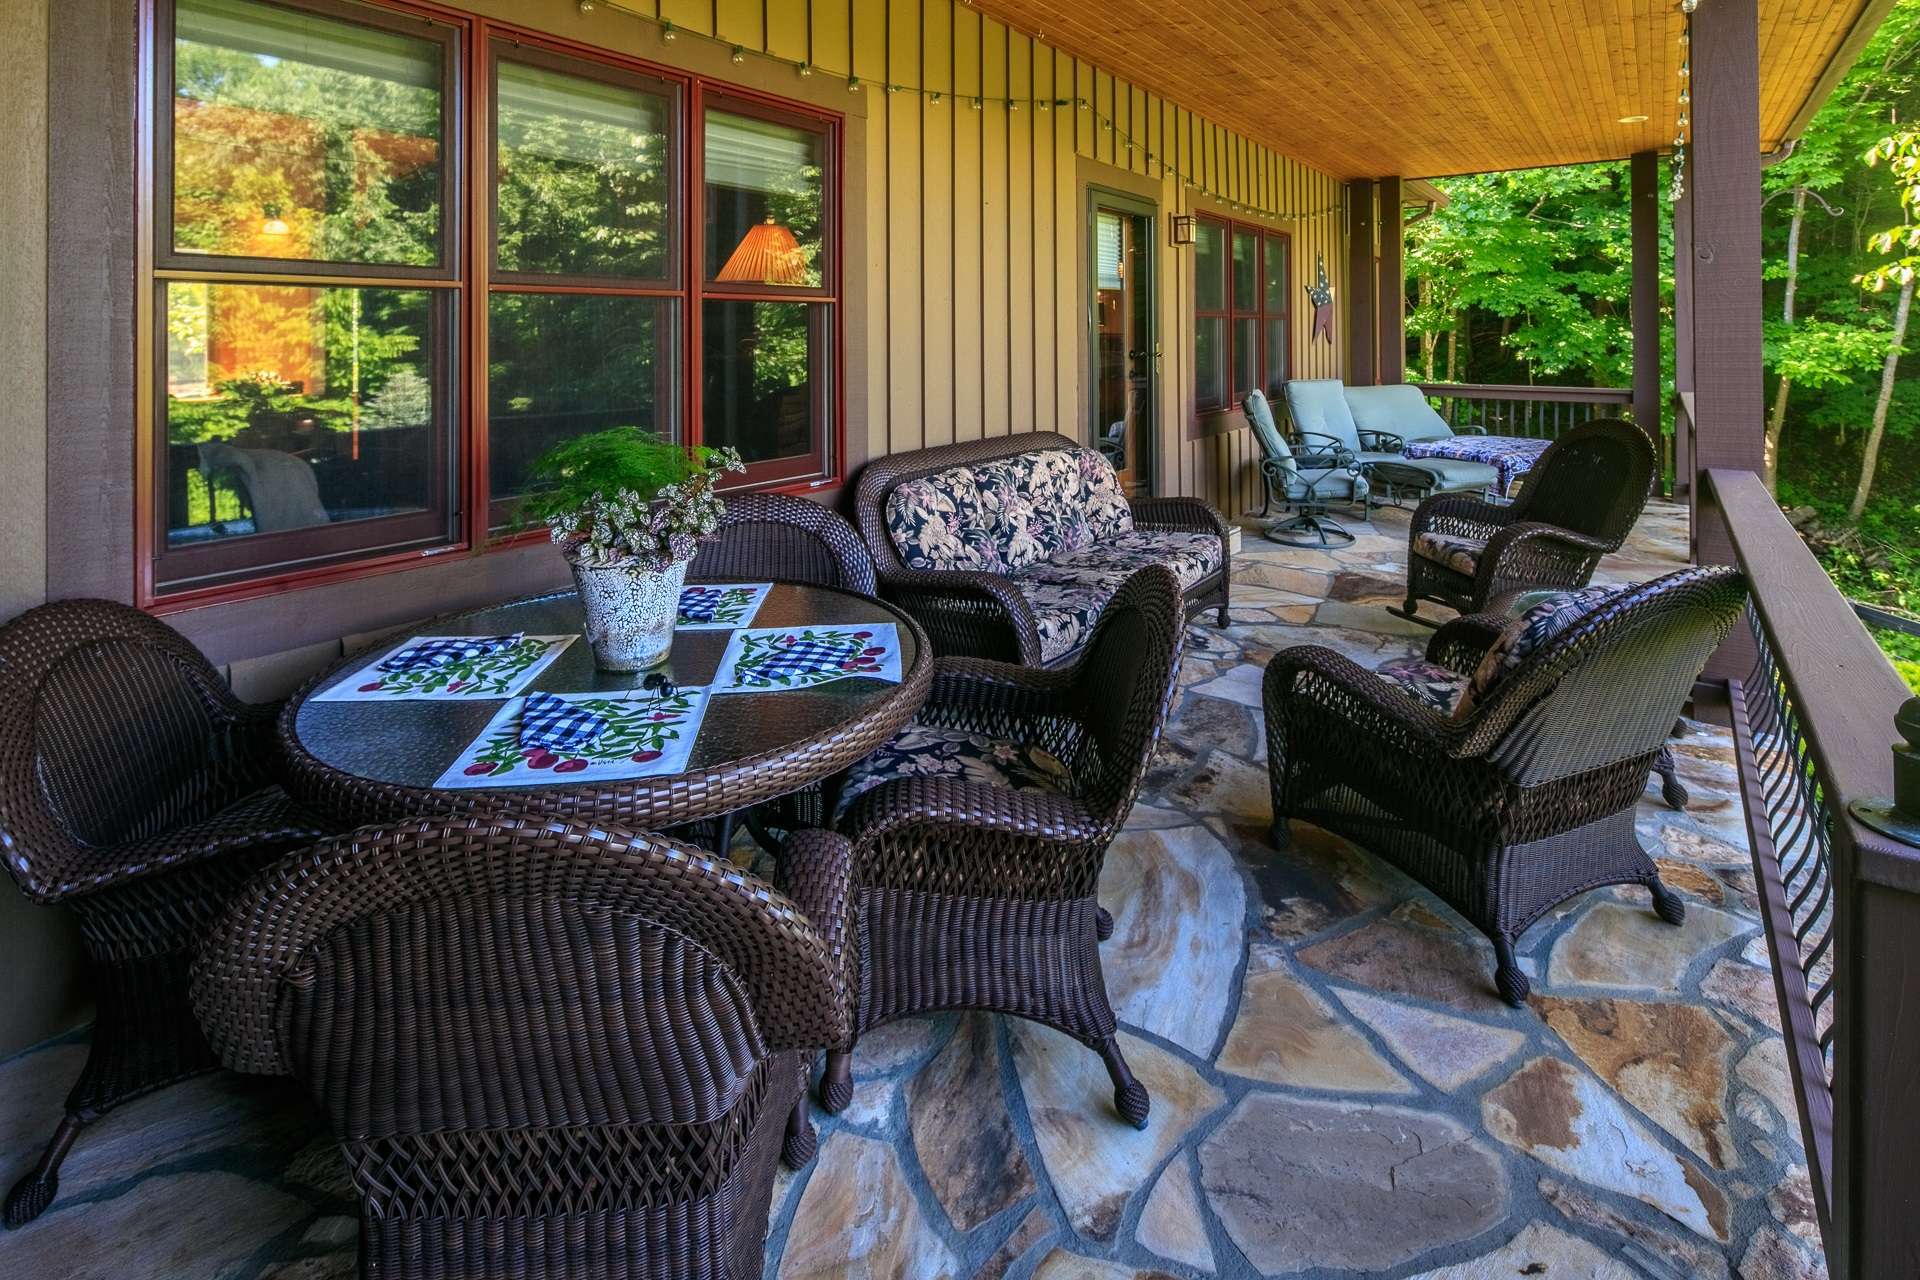 Walk out to the awe-inspiring outdoor entertaining area overlooking beautiful gardens, the pond, and views of Bluff Mountain.